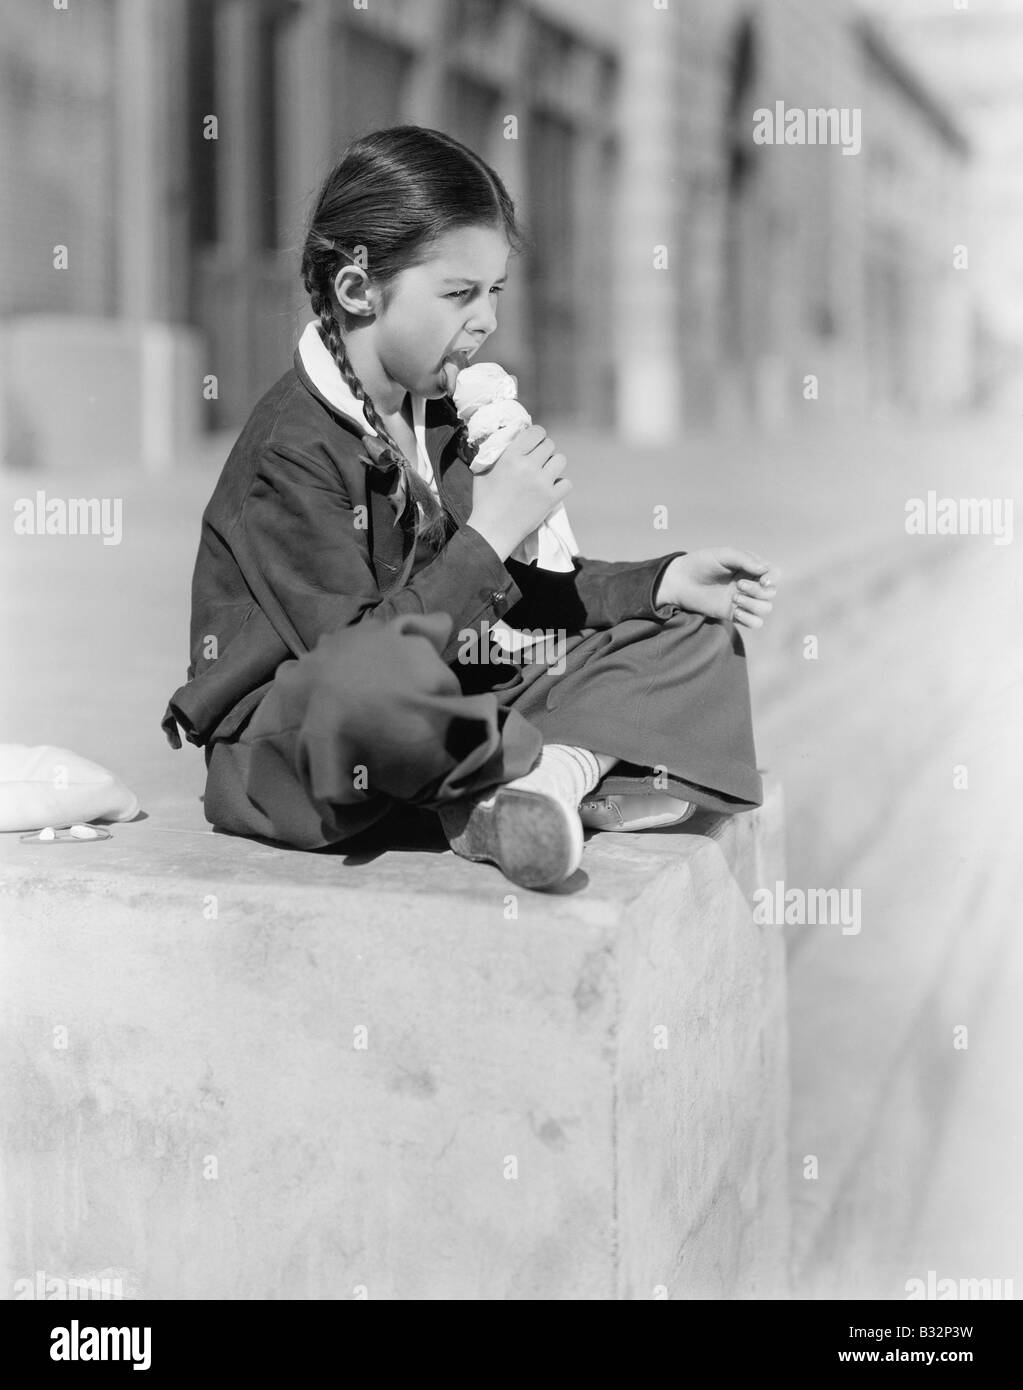 Portrait of Girl eating ice cream cone Banque D'Images